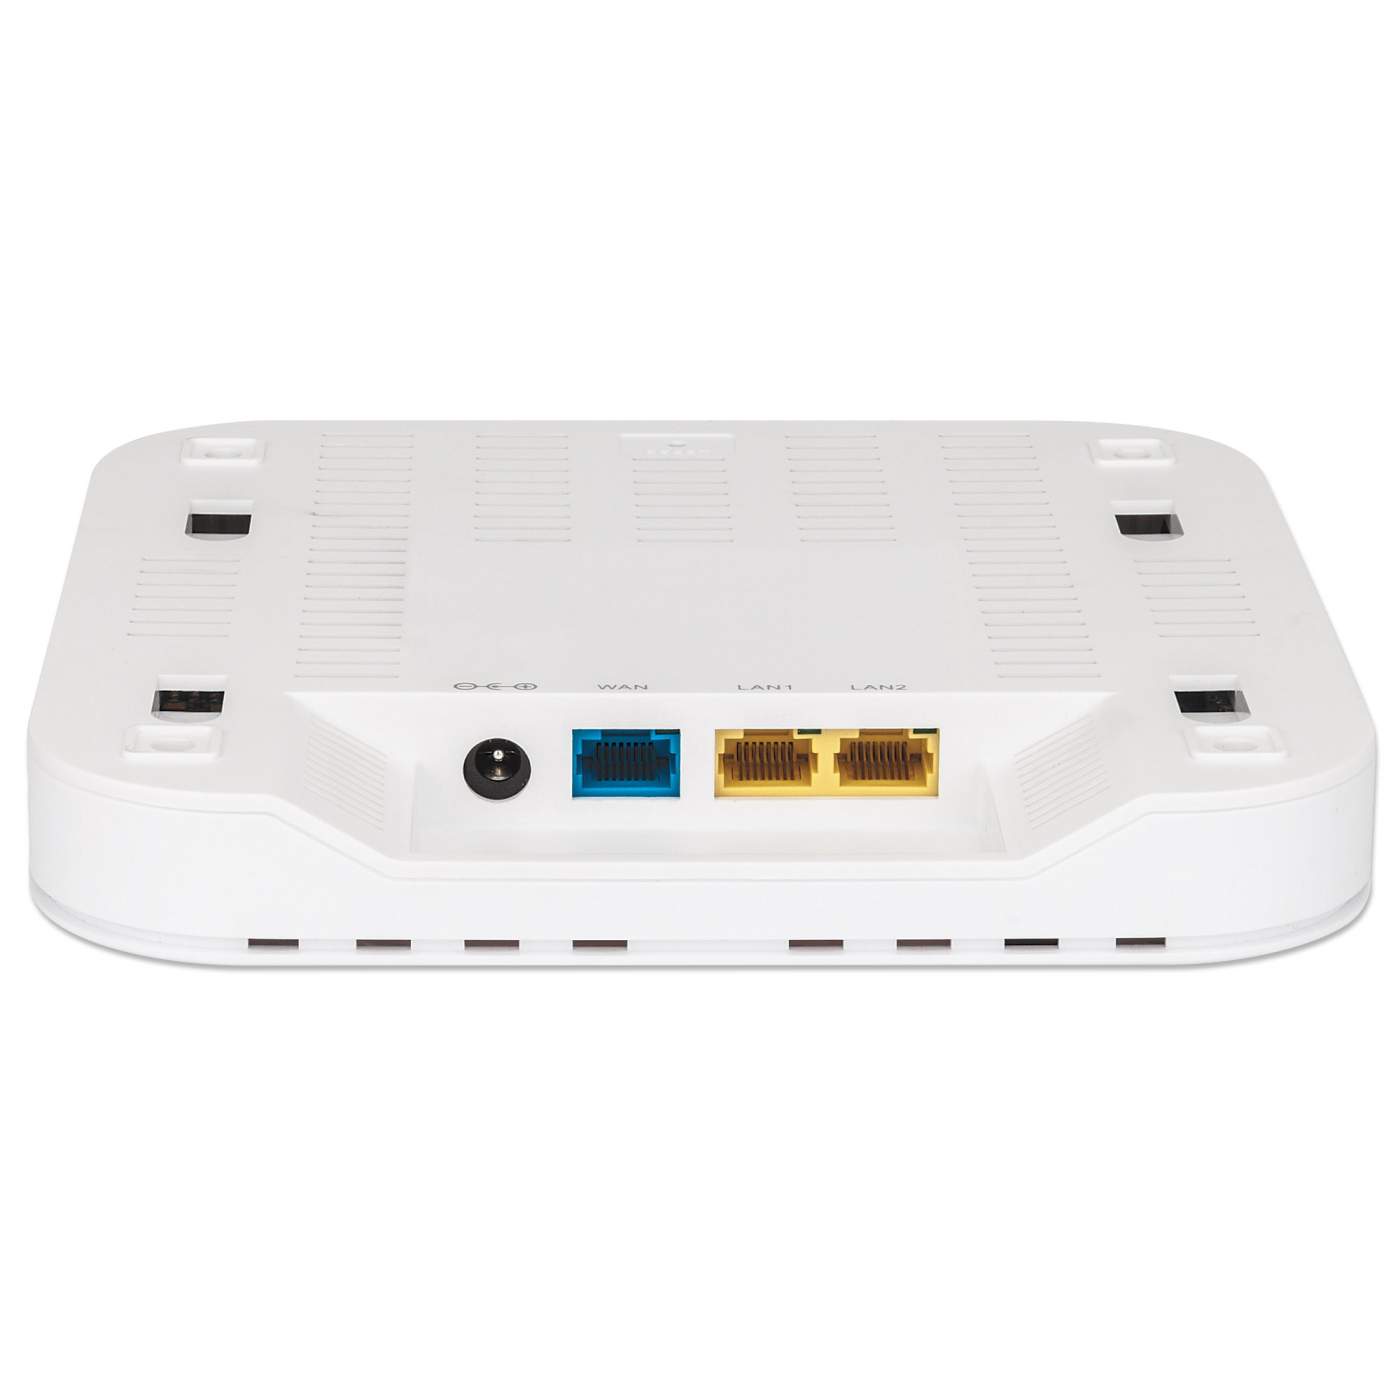 Manageable Wireless AC1300 Dual-Band Gigabit PoE Indoor Access Point and Router Image 5